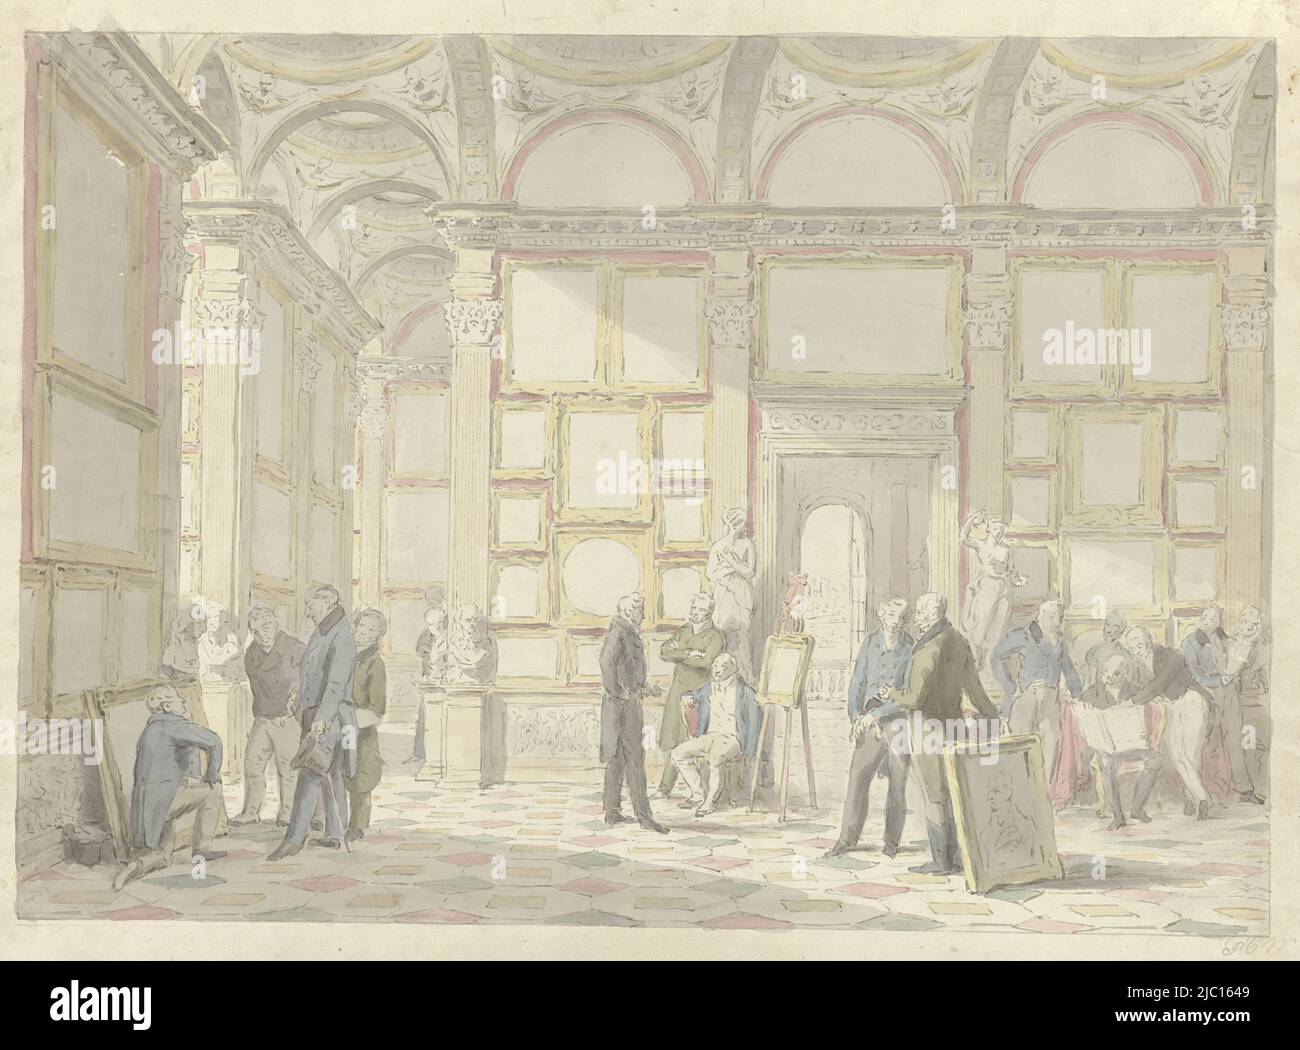 Sketch of the London painting of a Gallery with a number of famous art lovers, painted for Lord Murray. Proposed from left to right: G. Watson Taylor, Rev. W. Holwell Car, Sir John Murray, P.C. Wonder, Sir R. Peel, Sir D. Wilkie R.A., G.O. Wyndham (Earl of Egremont), G.J.W. Aga-Ellis (later Baron Dover), R. Earl of Grosvenor (later Duke of Westminster), G. Granville (Marquis of Stafford, later Duke of Sutherland and as portrait), Sir Ch. Long (later Lord Farnborough), Sir Abraham Hume bart, and the Earl of Aberdeen, Art lovers in a gallery., draughtsman: Pieter Christoffel Wonder, (signed by Stock Photo